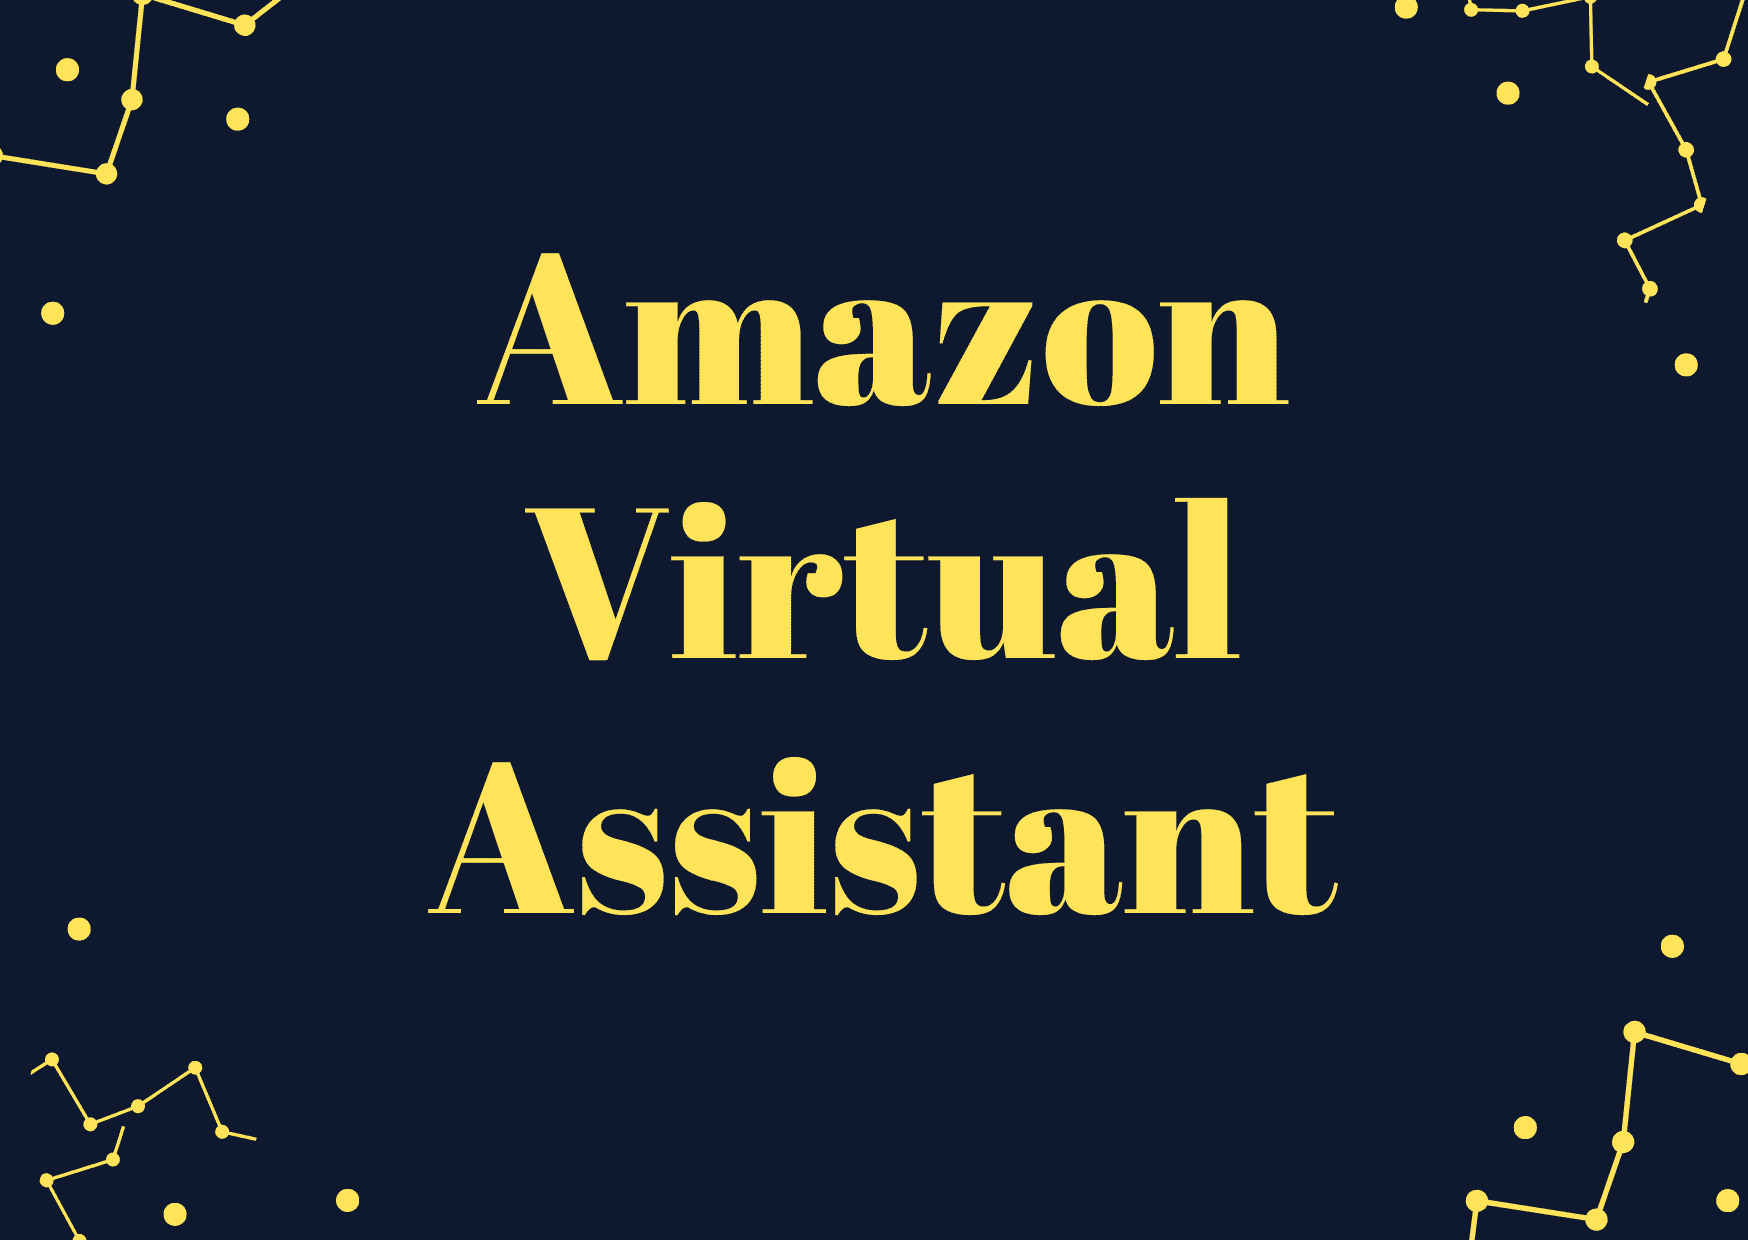 I will be your Amazon Virtual Assistant